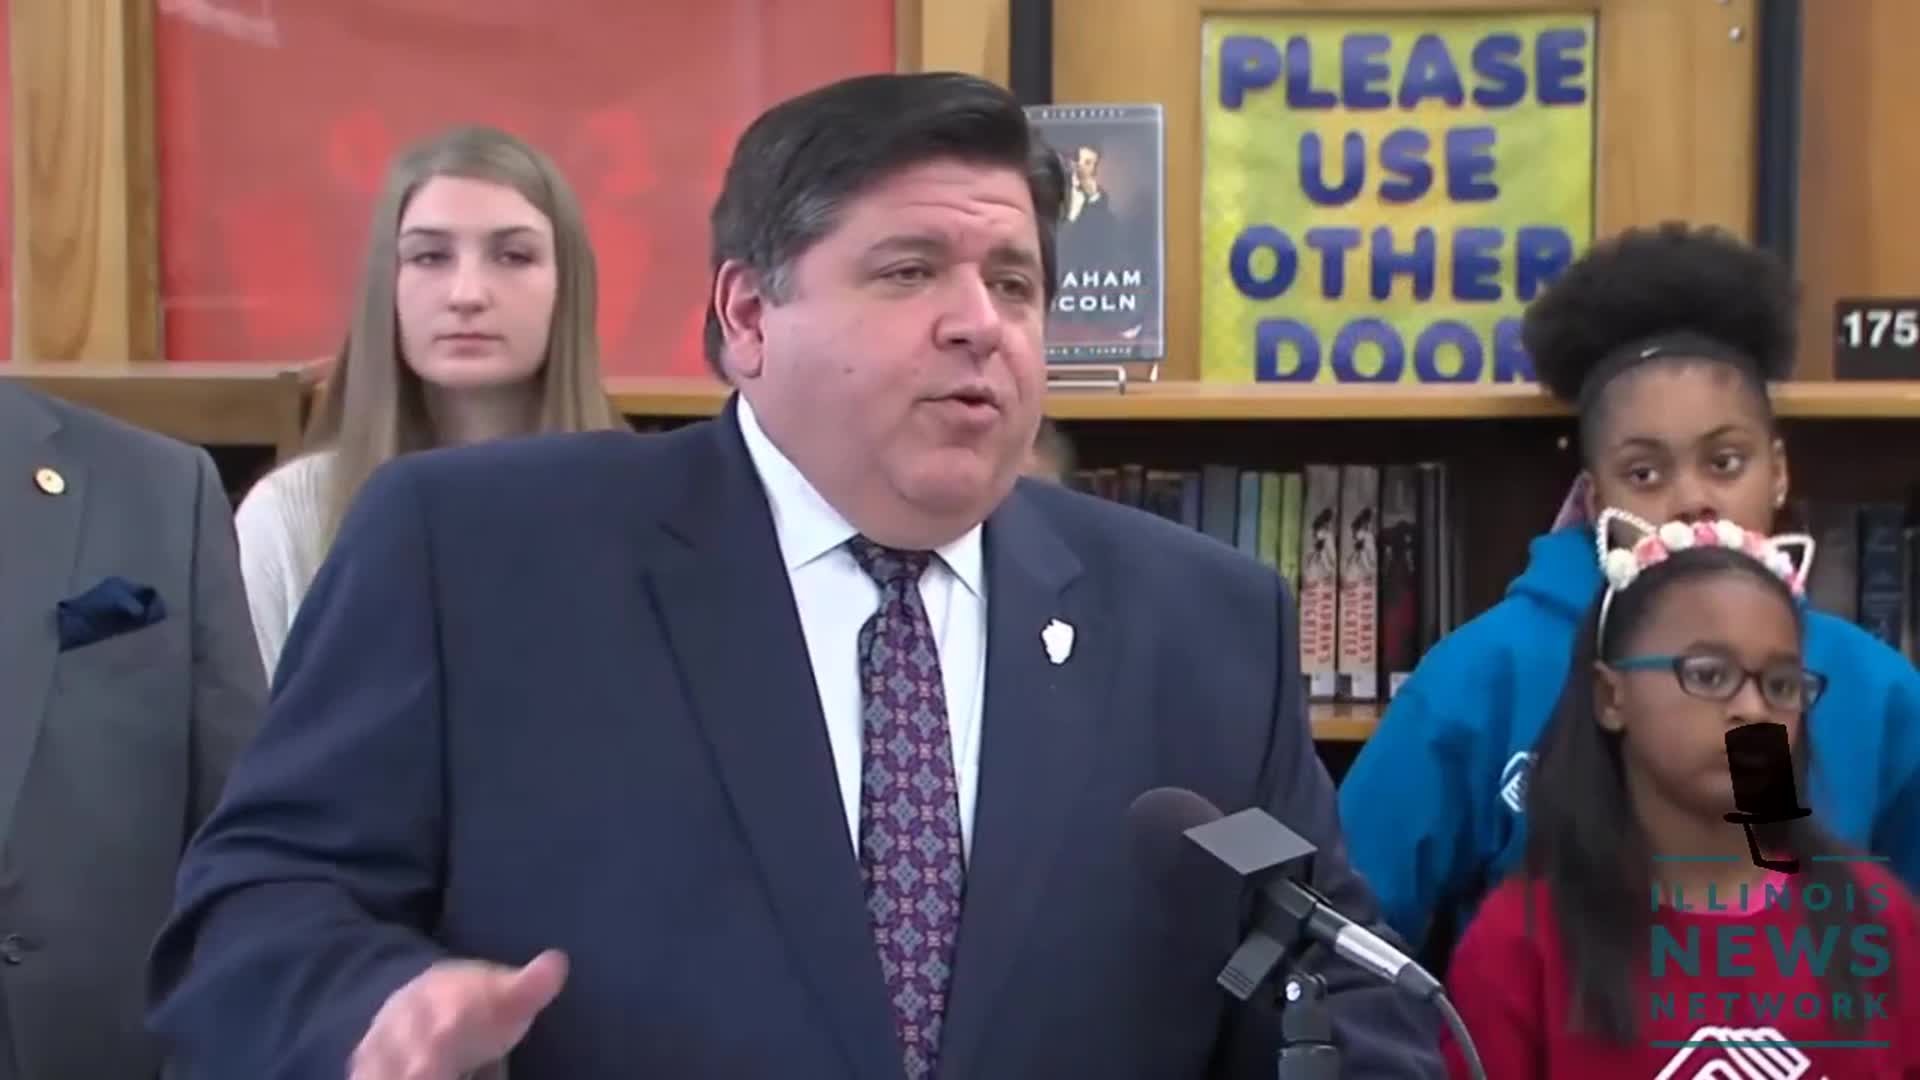 Pritzker responds to reports of low progressive tax support